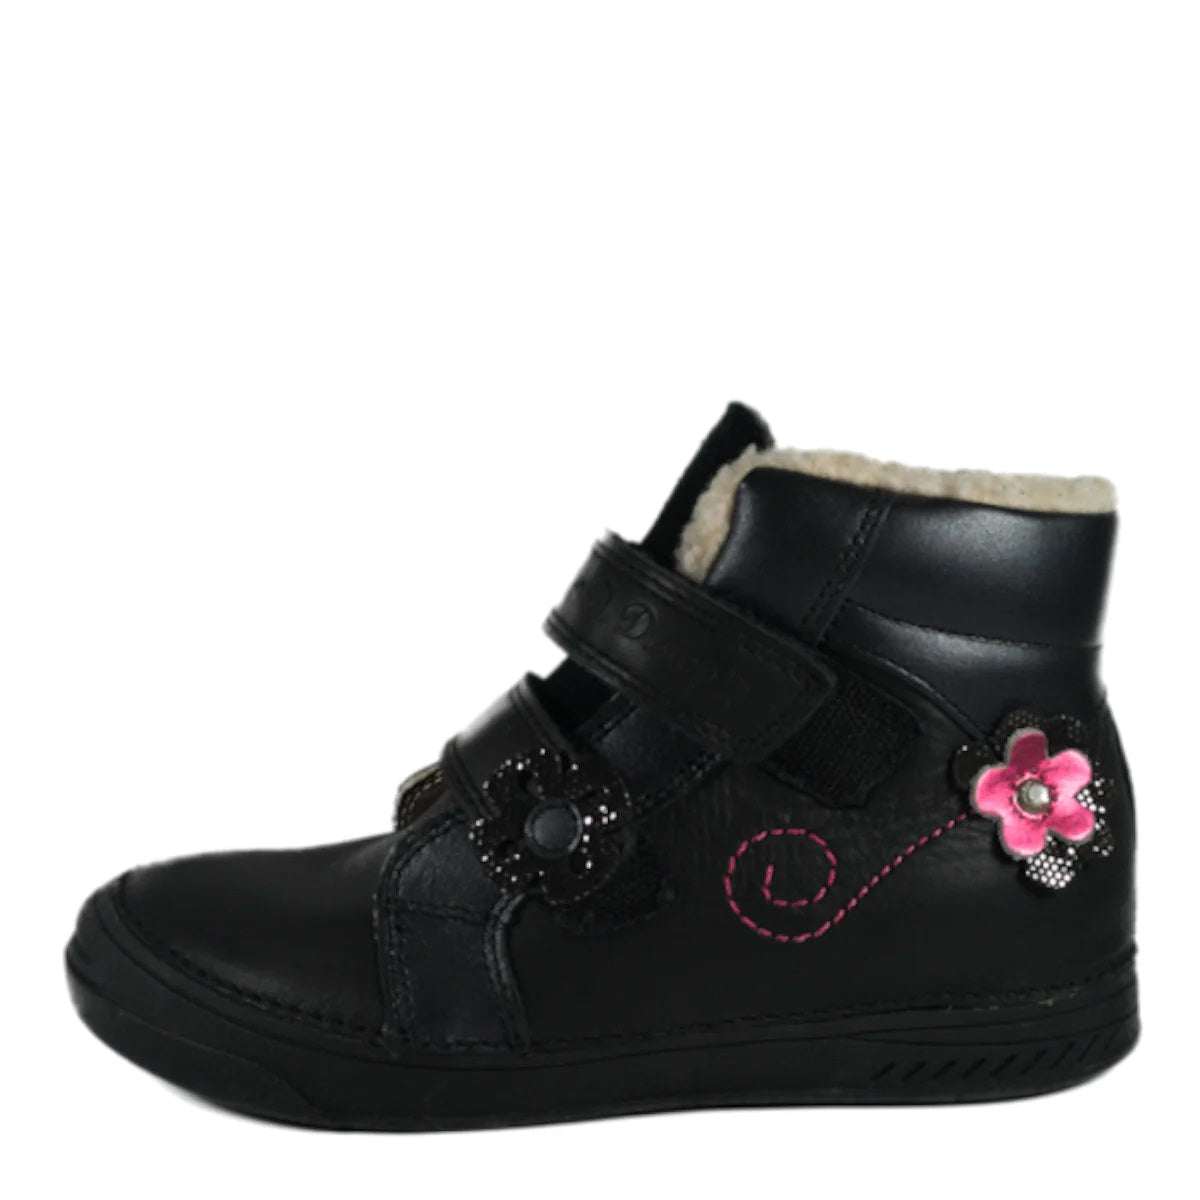 D.D. Step Big Kid Girl Shoes/Winter Boots With Faux Fur Insulation Black Pink Flower - Supportive Leather Shoes From Europe Kids Orthopedic - shoekid.ca